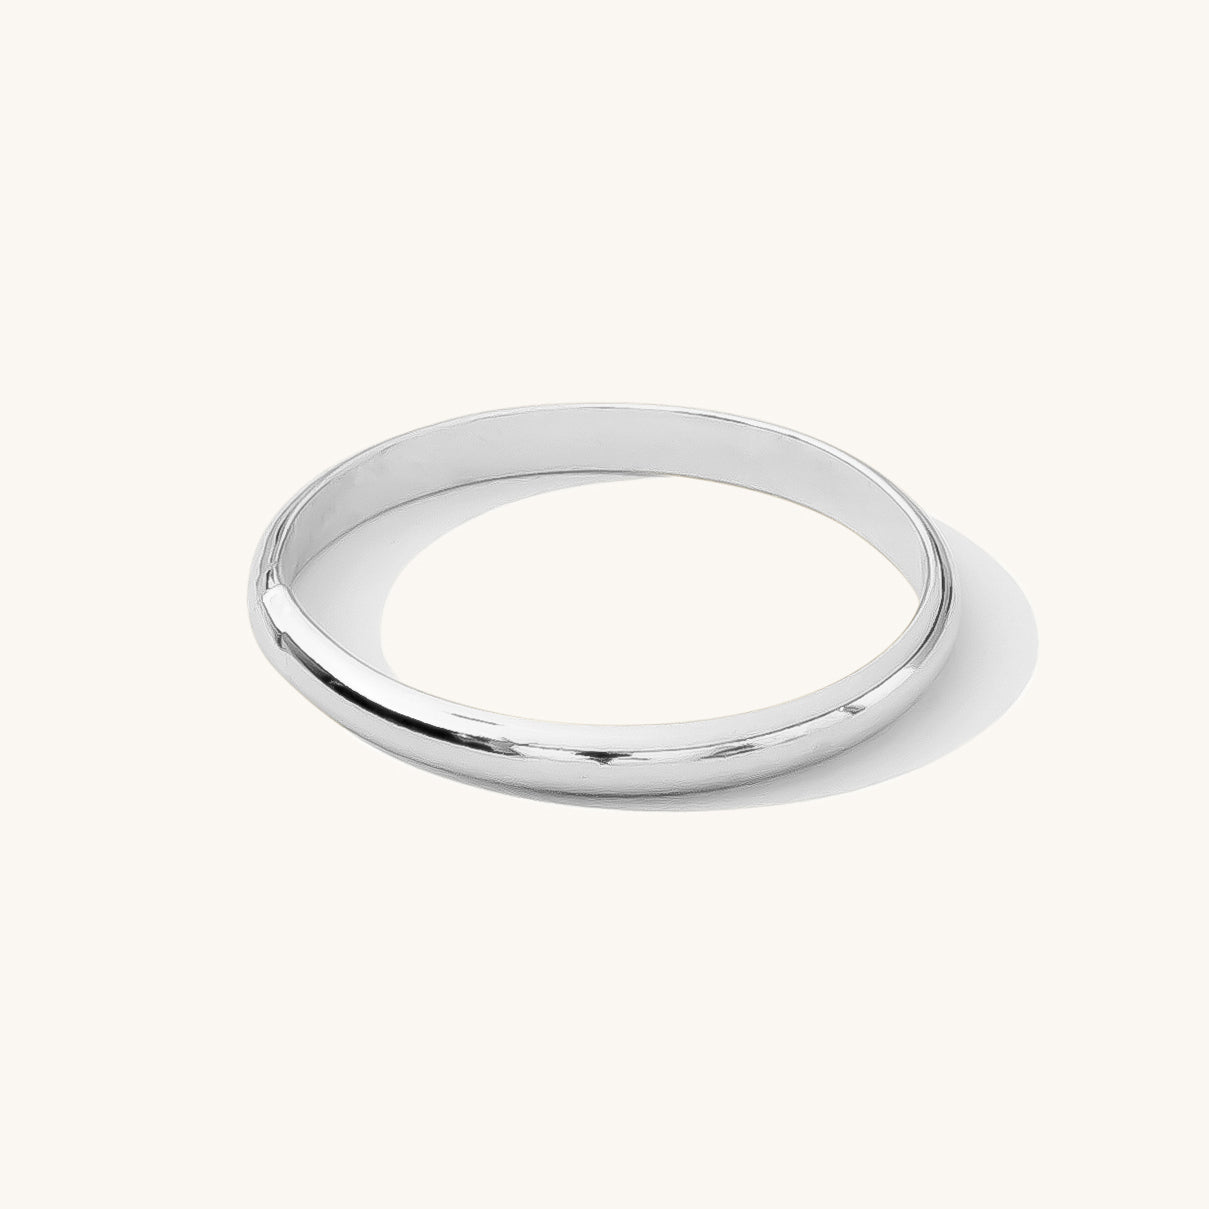 Thin Band Ring | Simple & Dainty Jewelry